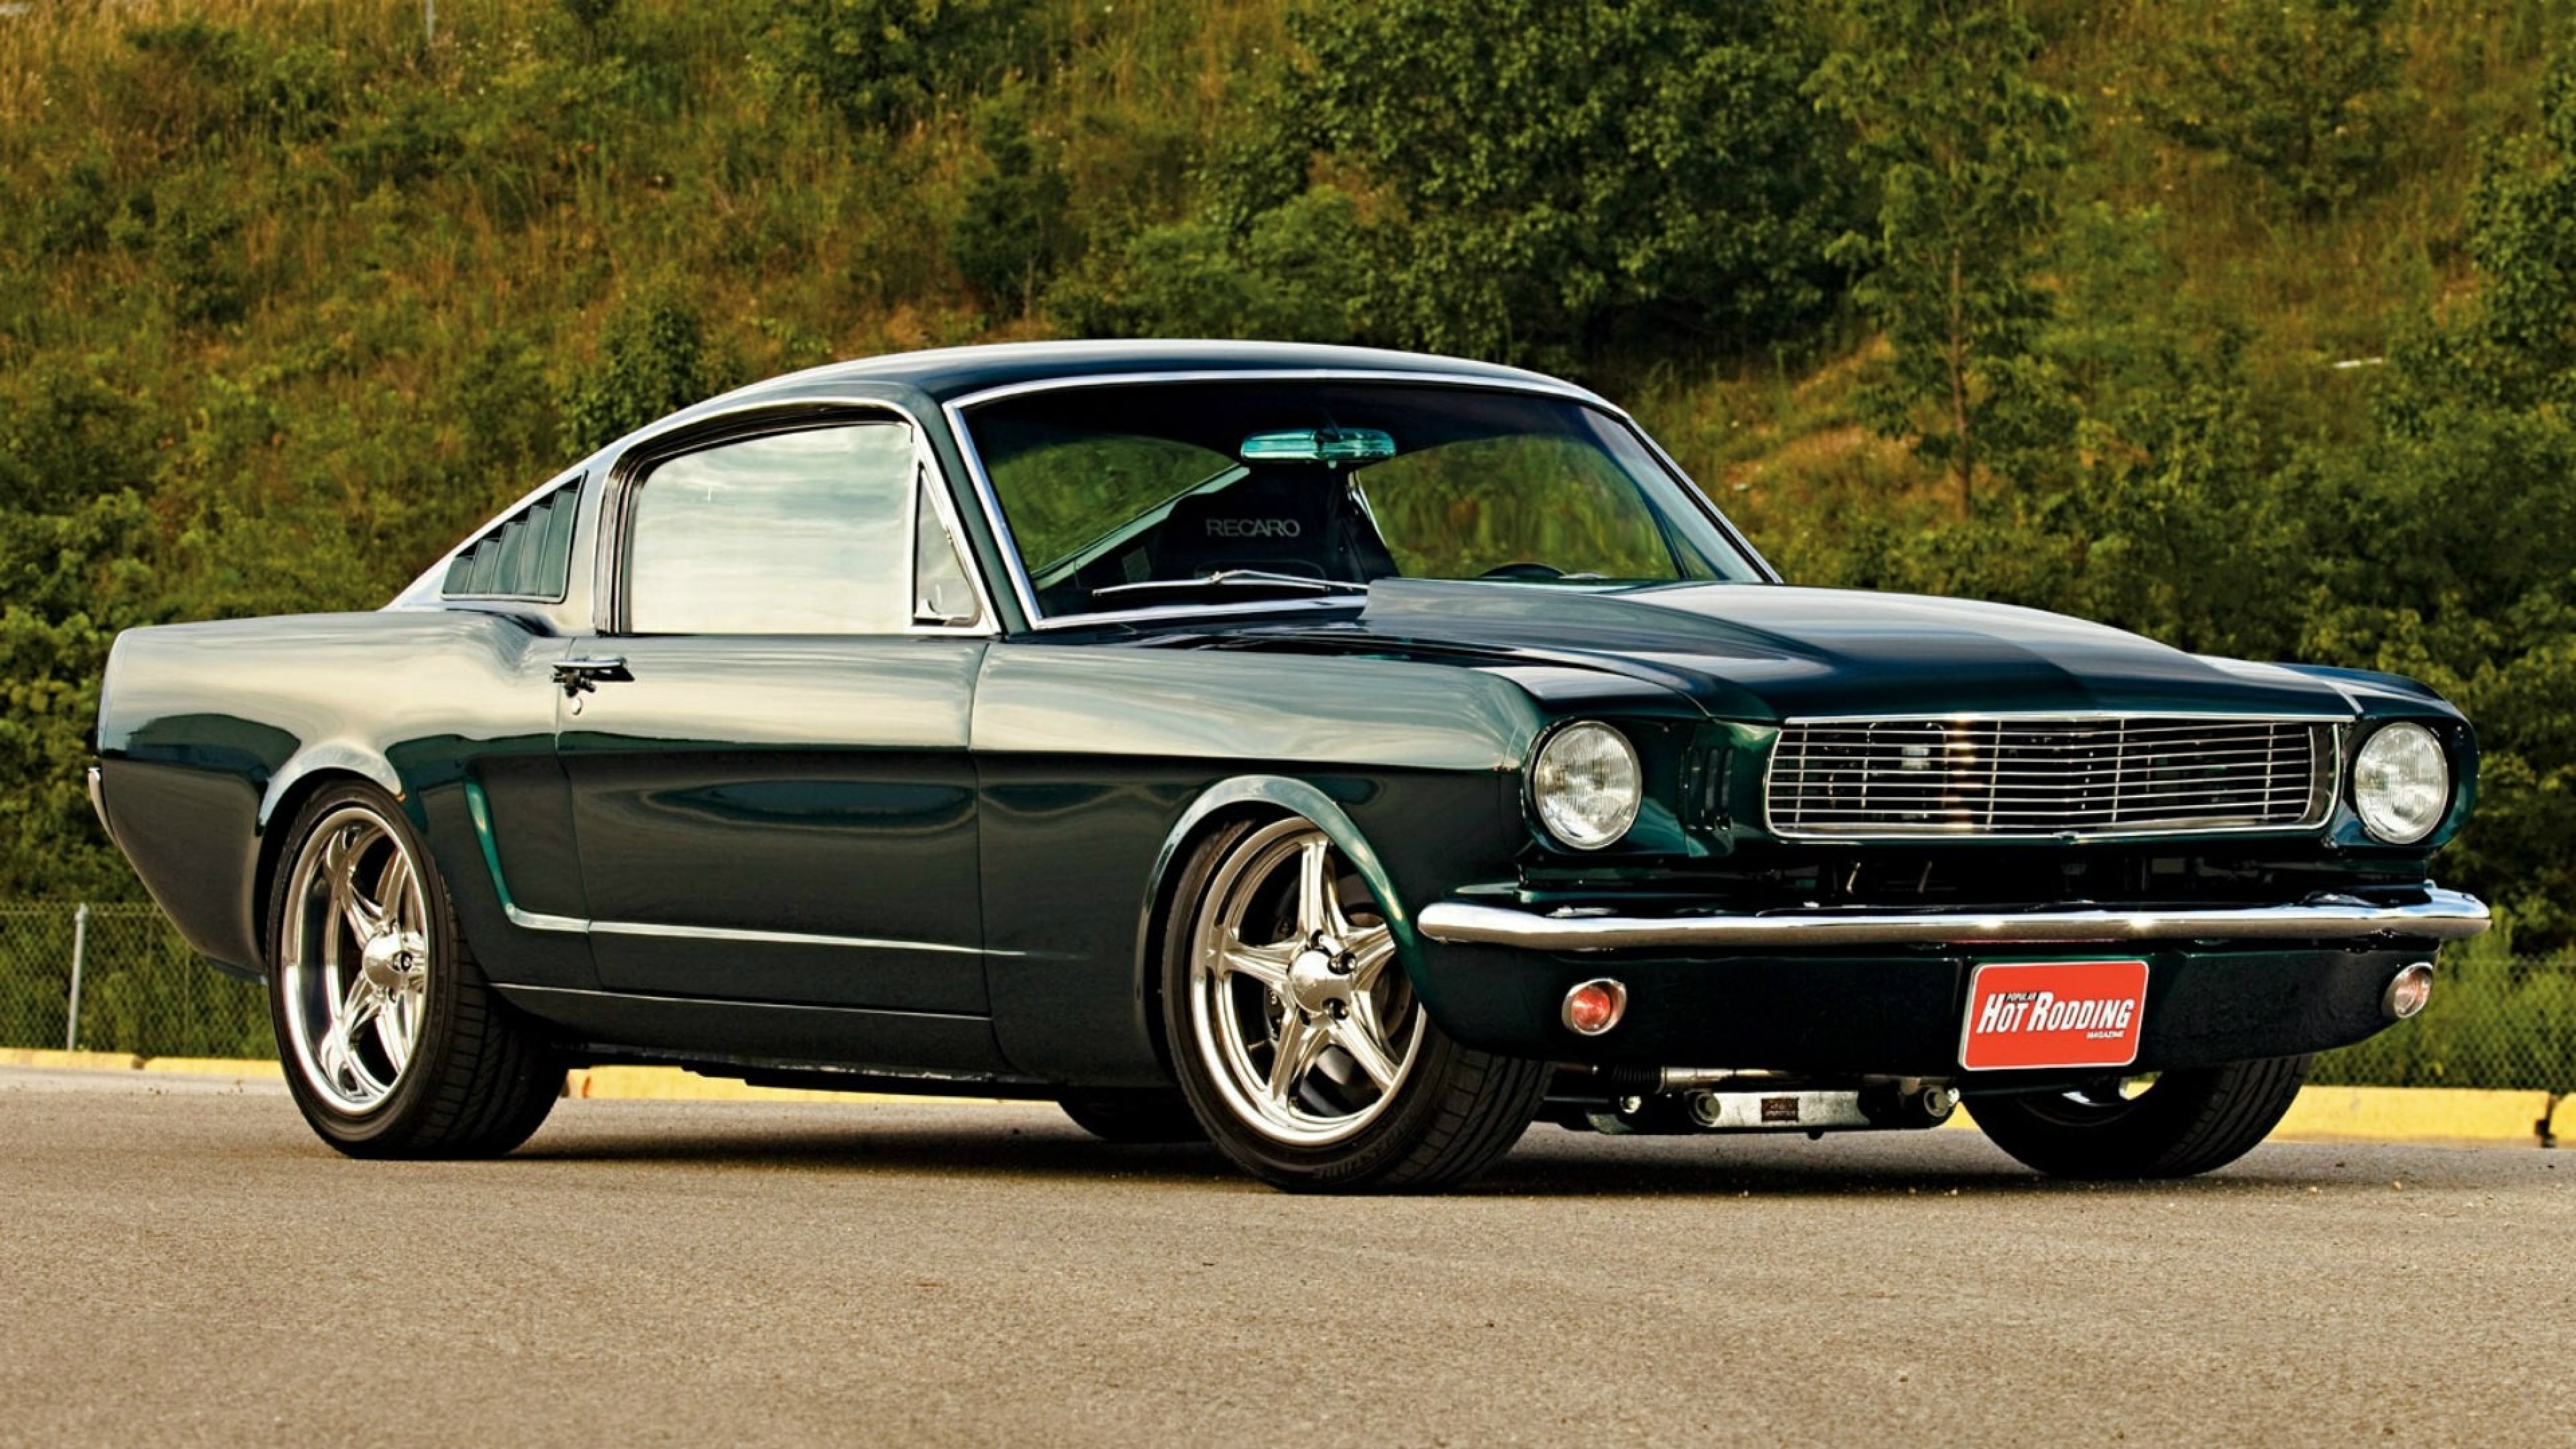 Car Mustang Fastback Style Cars Wallpaper Background 4k Ultra HD